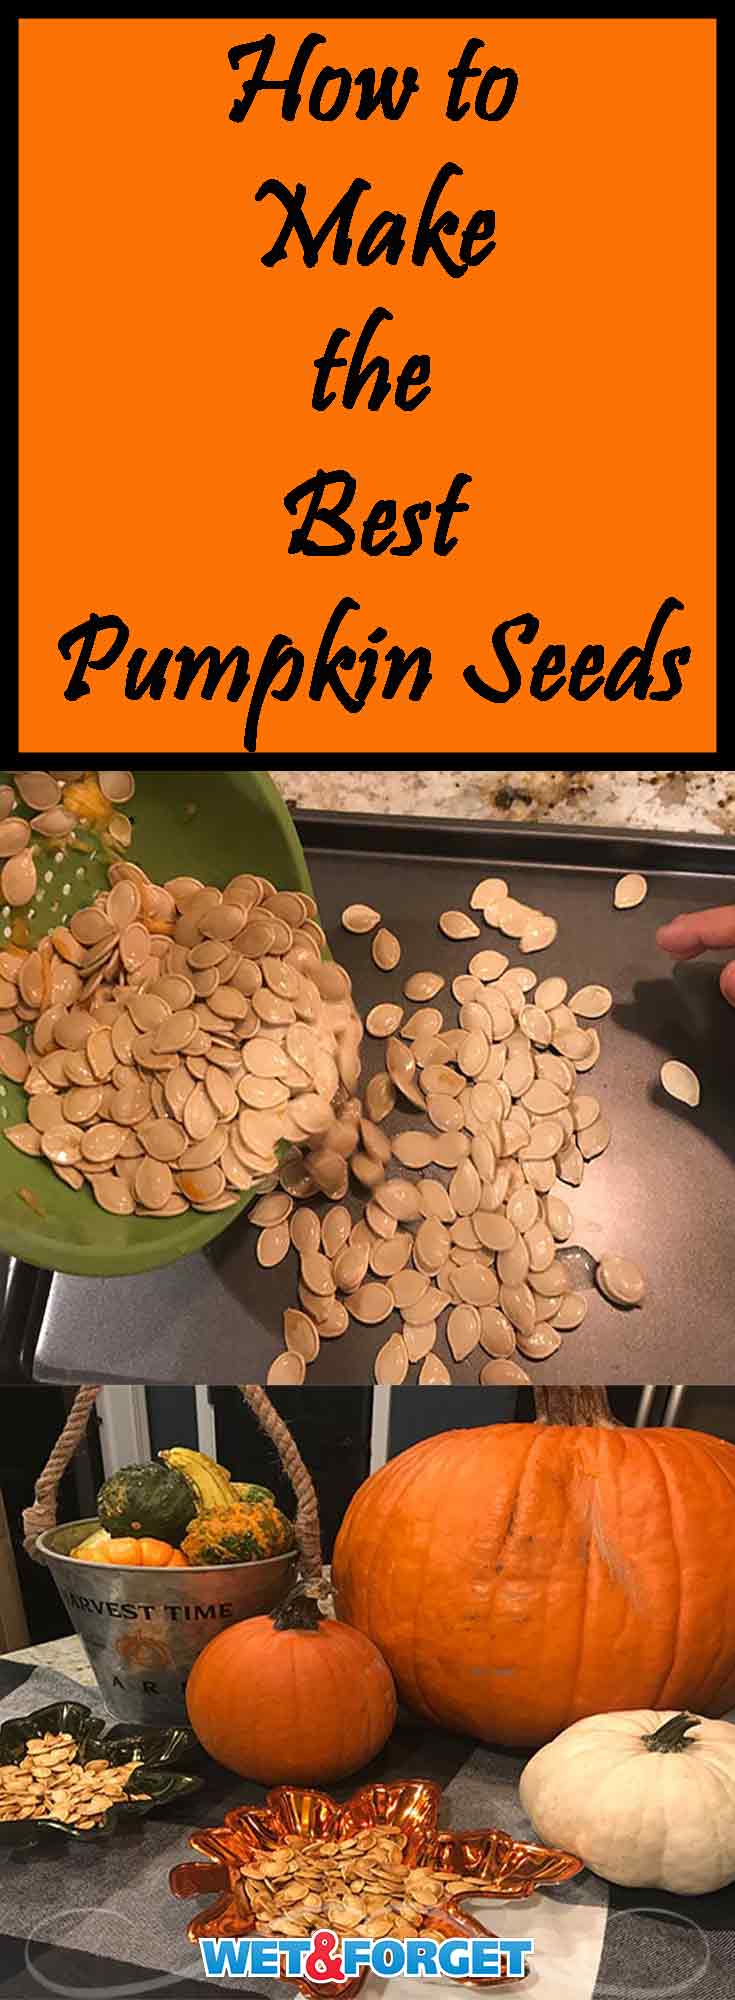 Fall's harvest is in full swing which makes it the perfect time to make pumpkin seeds! Read up on our top tips and favorite recipe for making pumpkin seeds. 